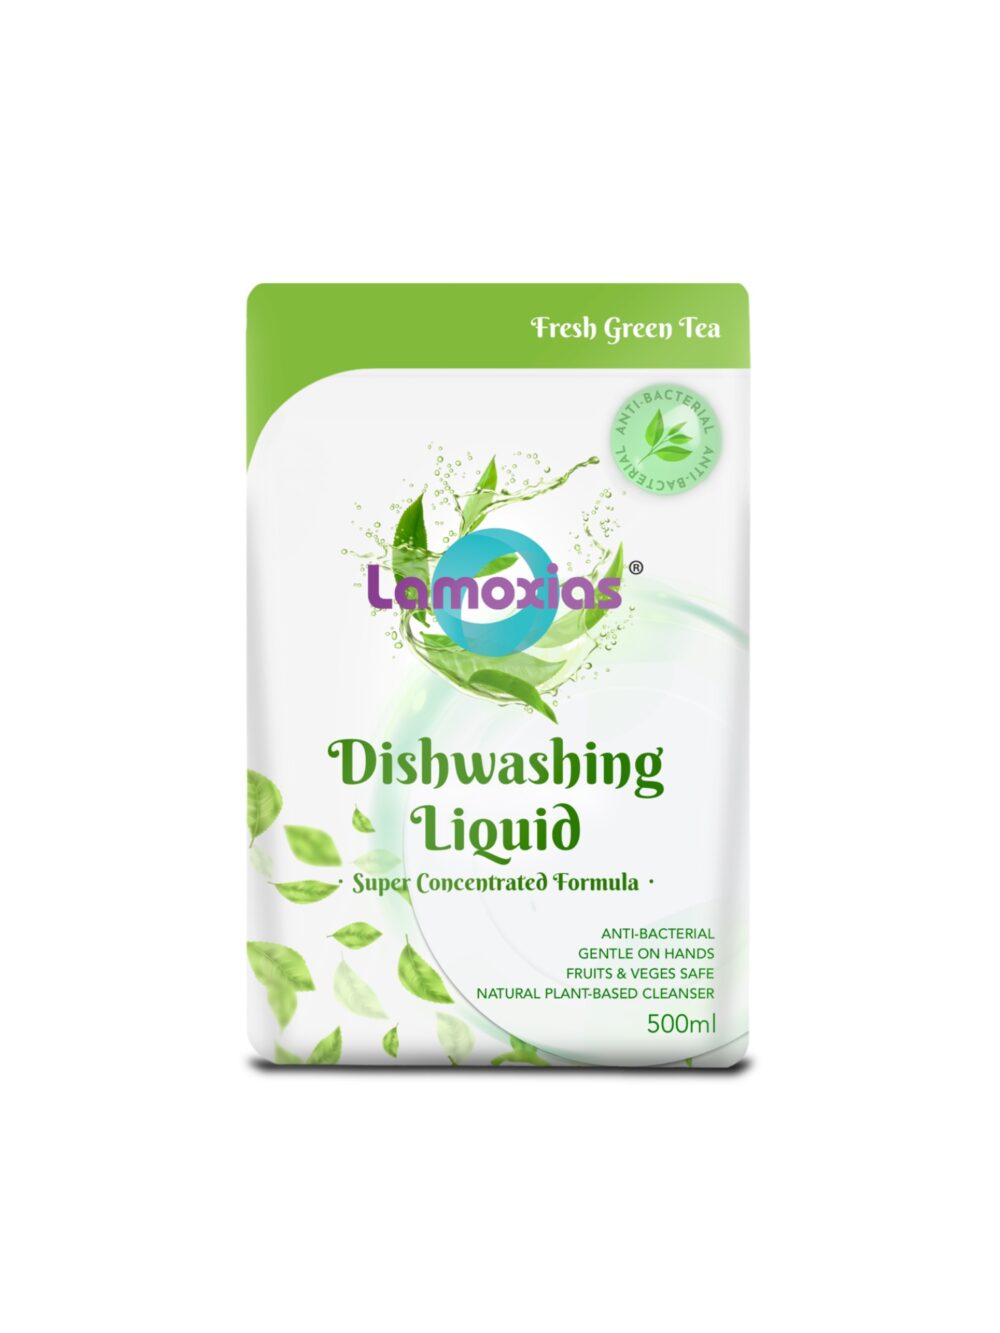 The perfect dishwashing liquid for daily use. Actual Green-Tea infused liquid that not only moisturises your hands while washing, but also safe to wash your fruits and vegetables.